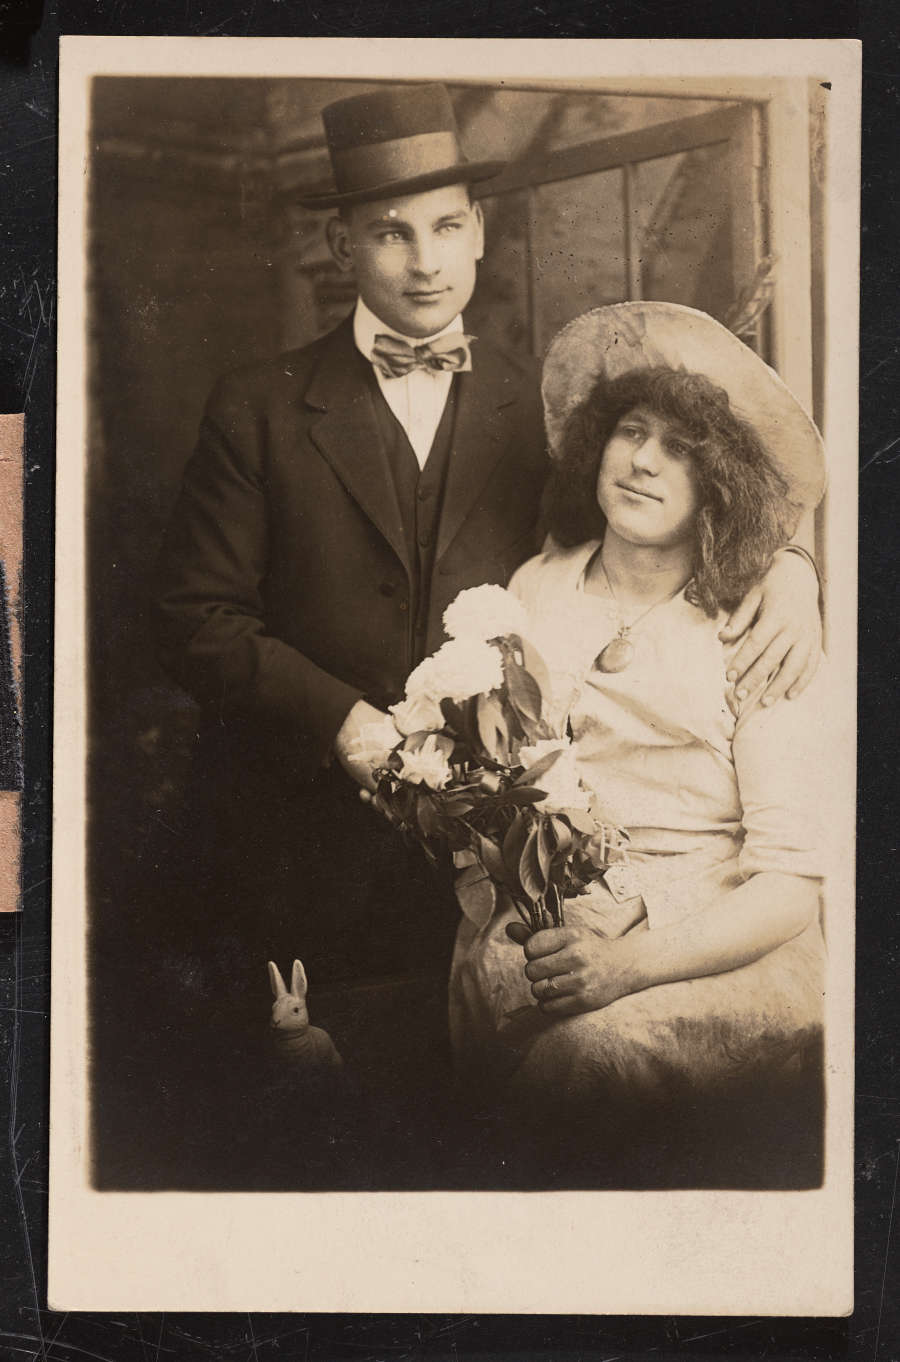 Photographic portrait of a man in a bowtie and hat. His arm is around another person, dressed as a woman, holding flowers. At bottom left, a small rabbit figurine appears. 